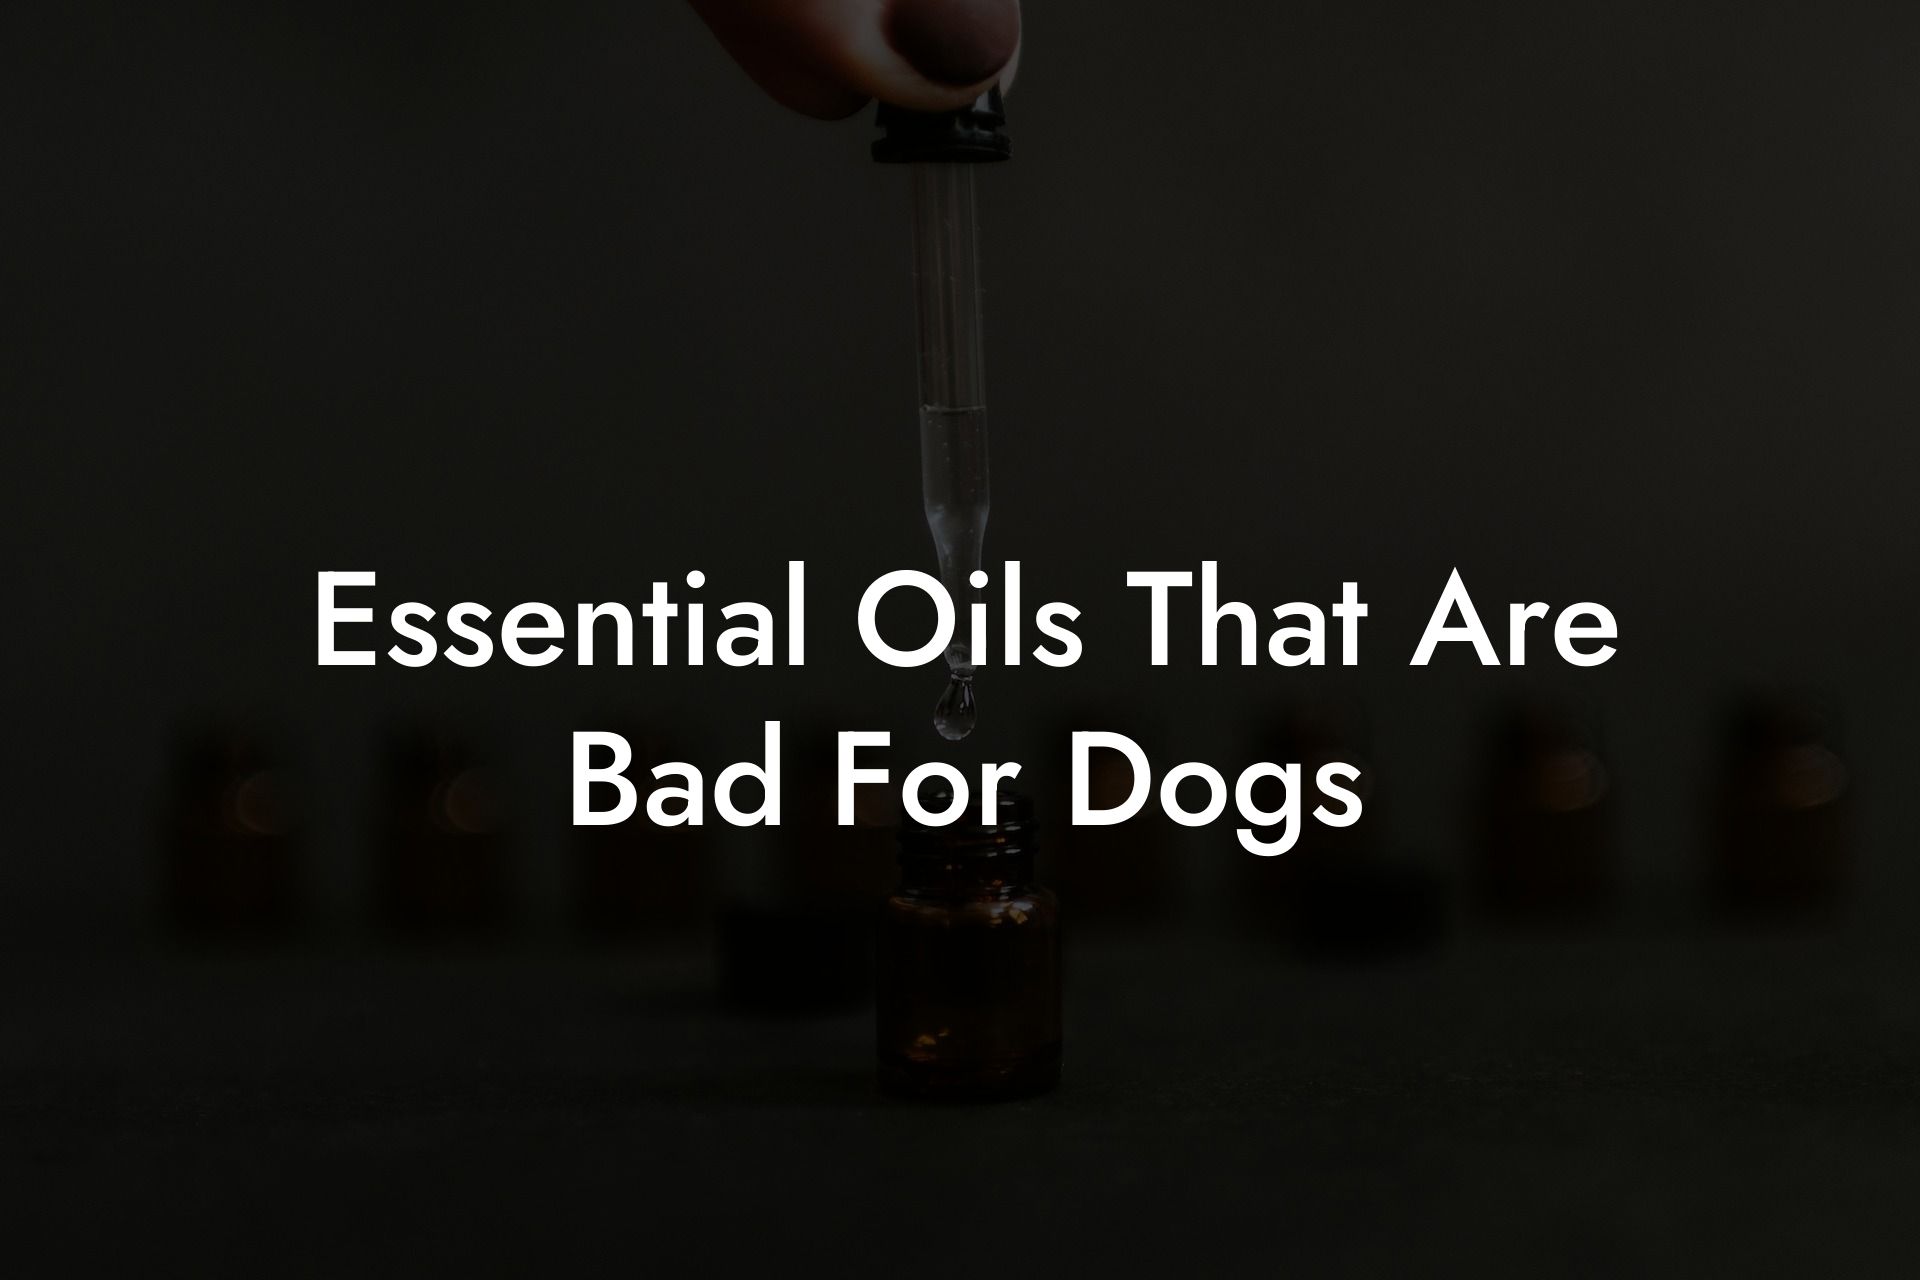 Essential Oils That Are Bad For Dogs